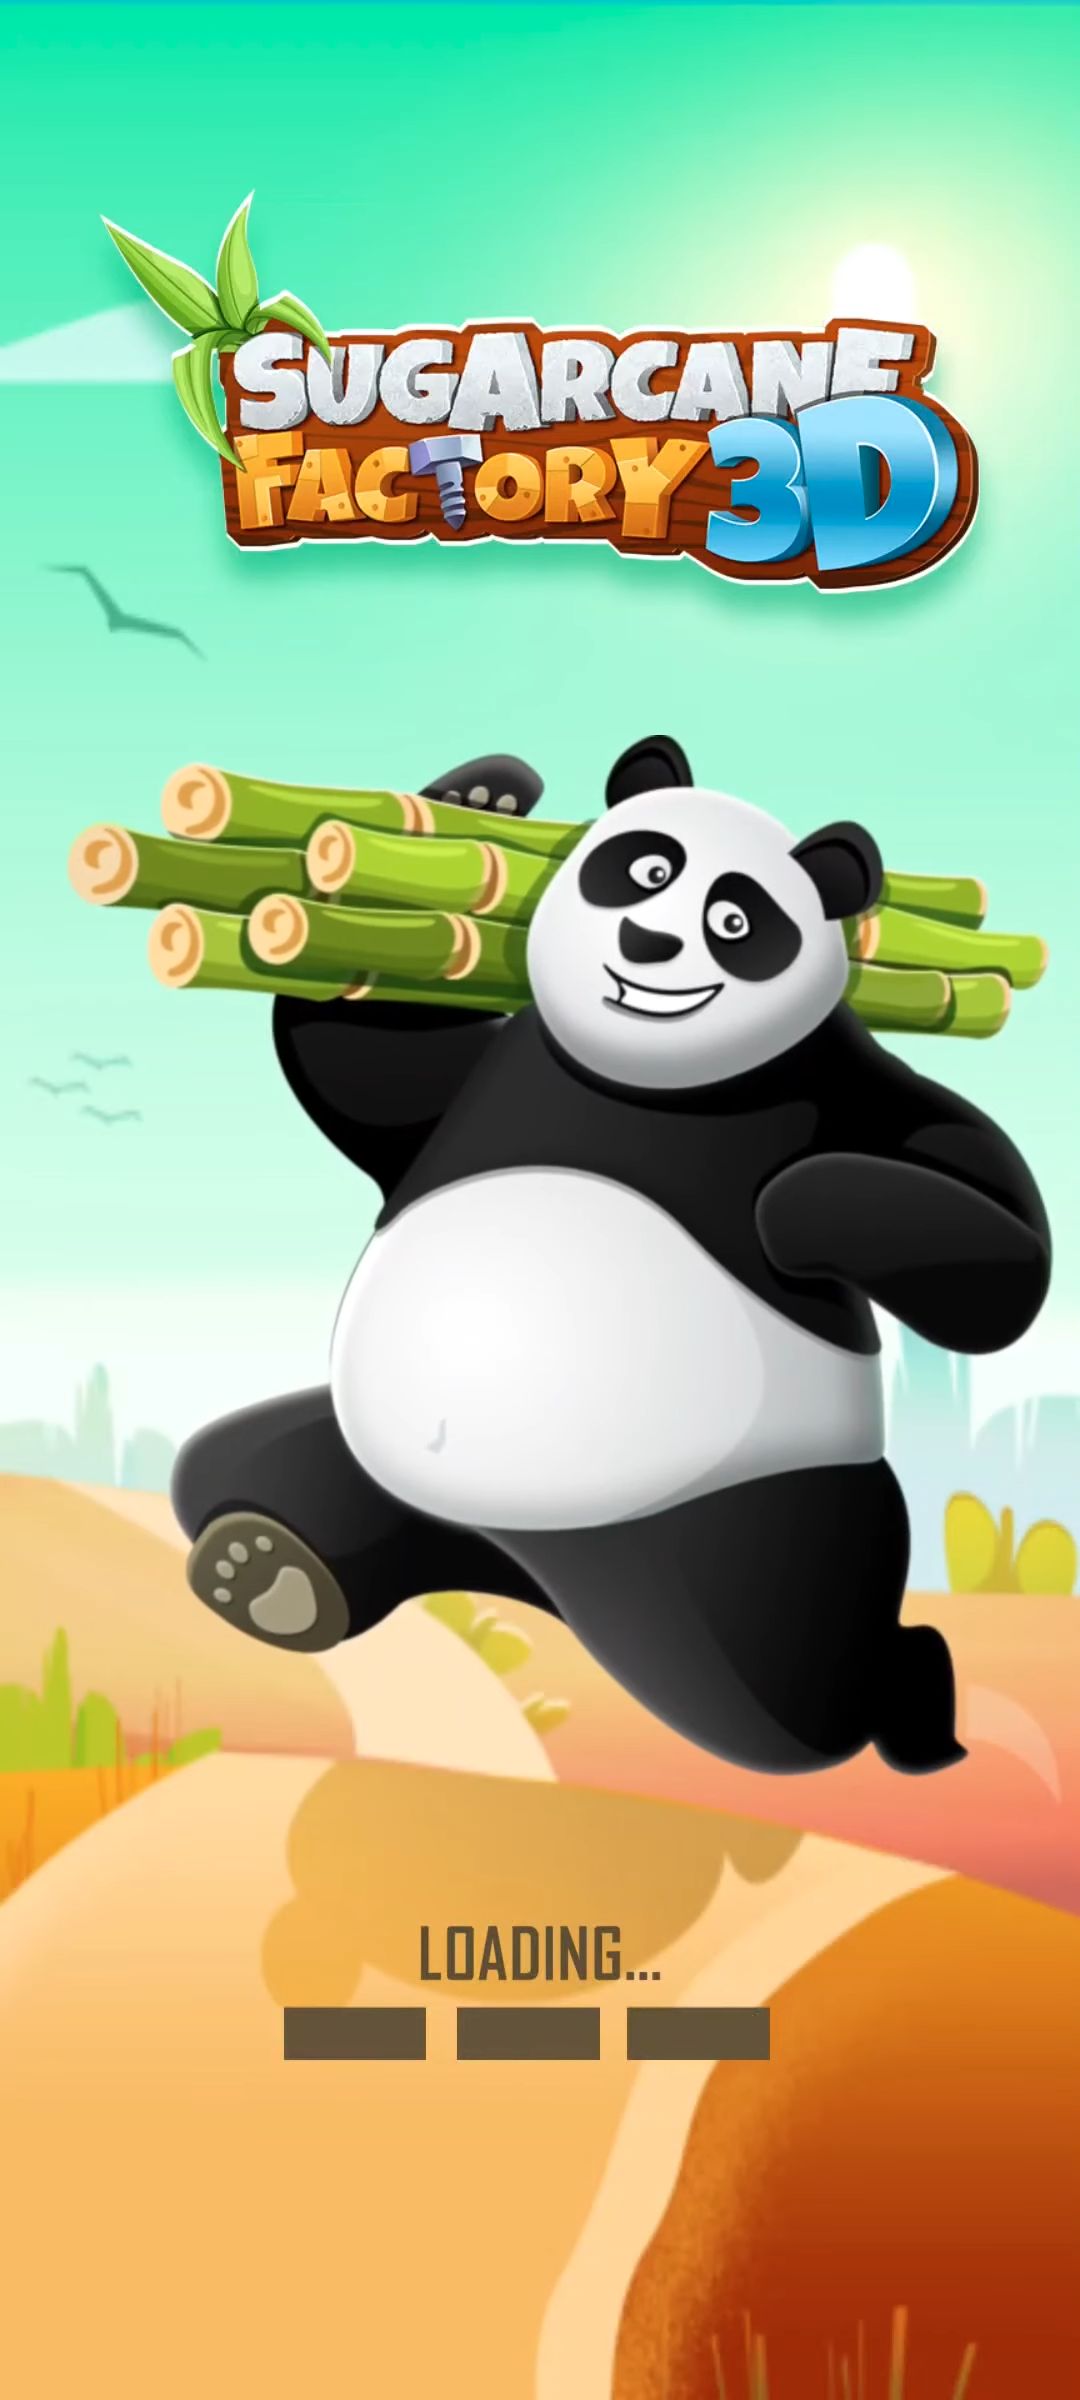 Full version of Android Easy game apk Sugarcane Inc. Empire Tycoon for tablet and phone.